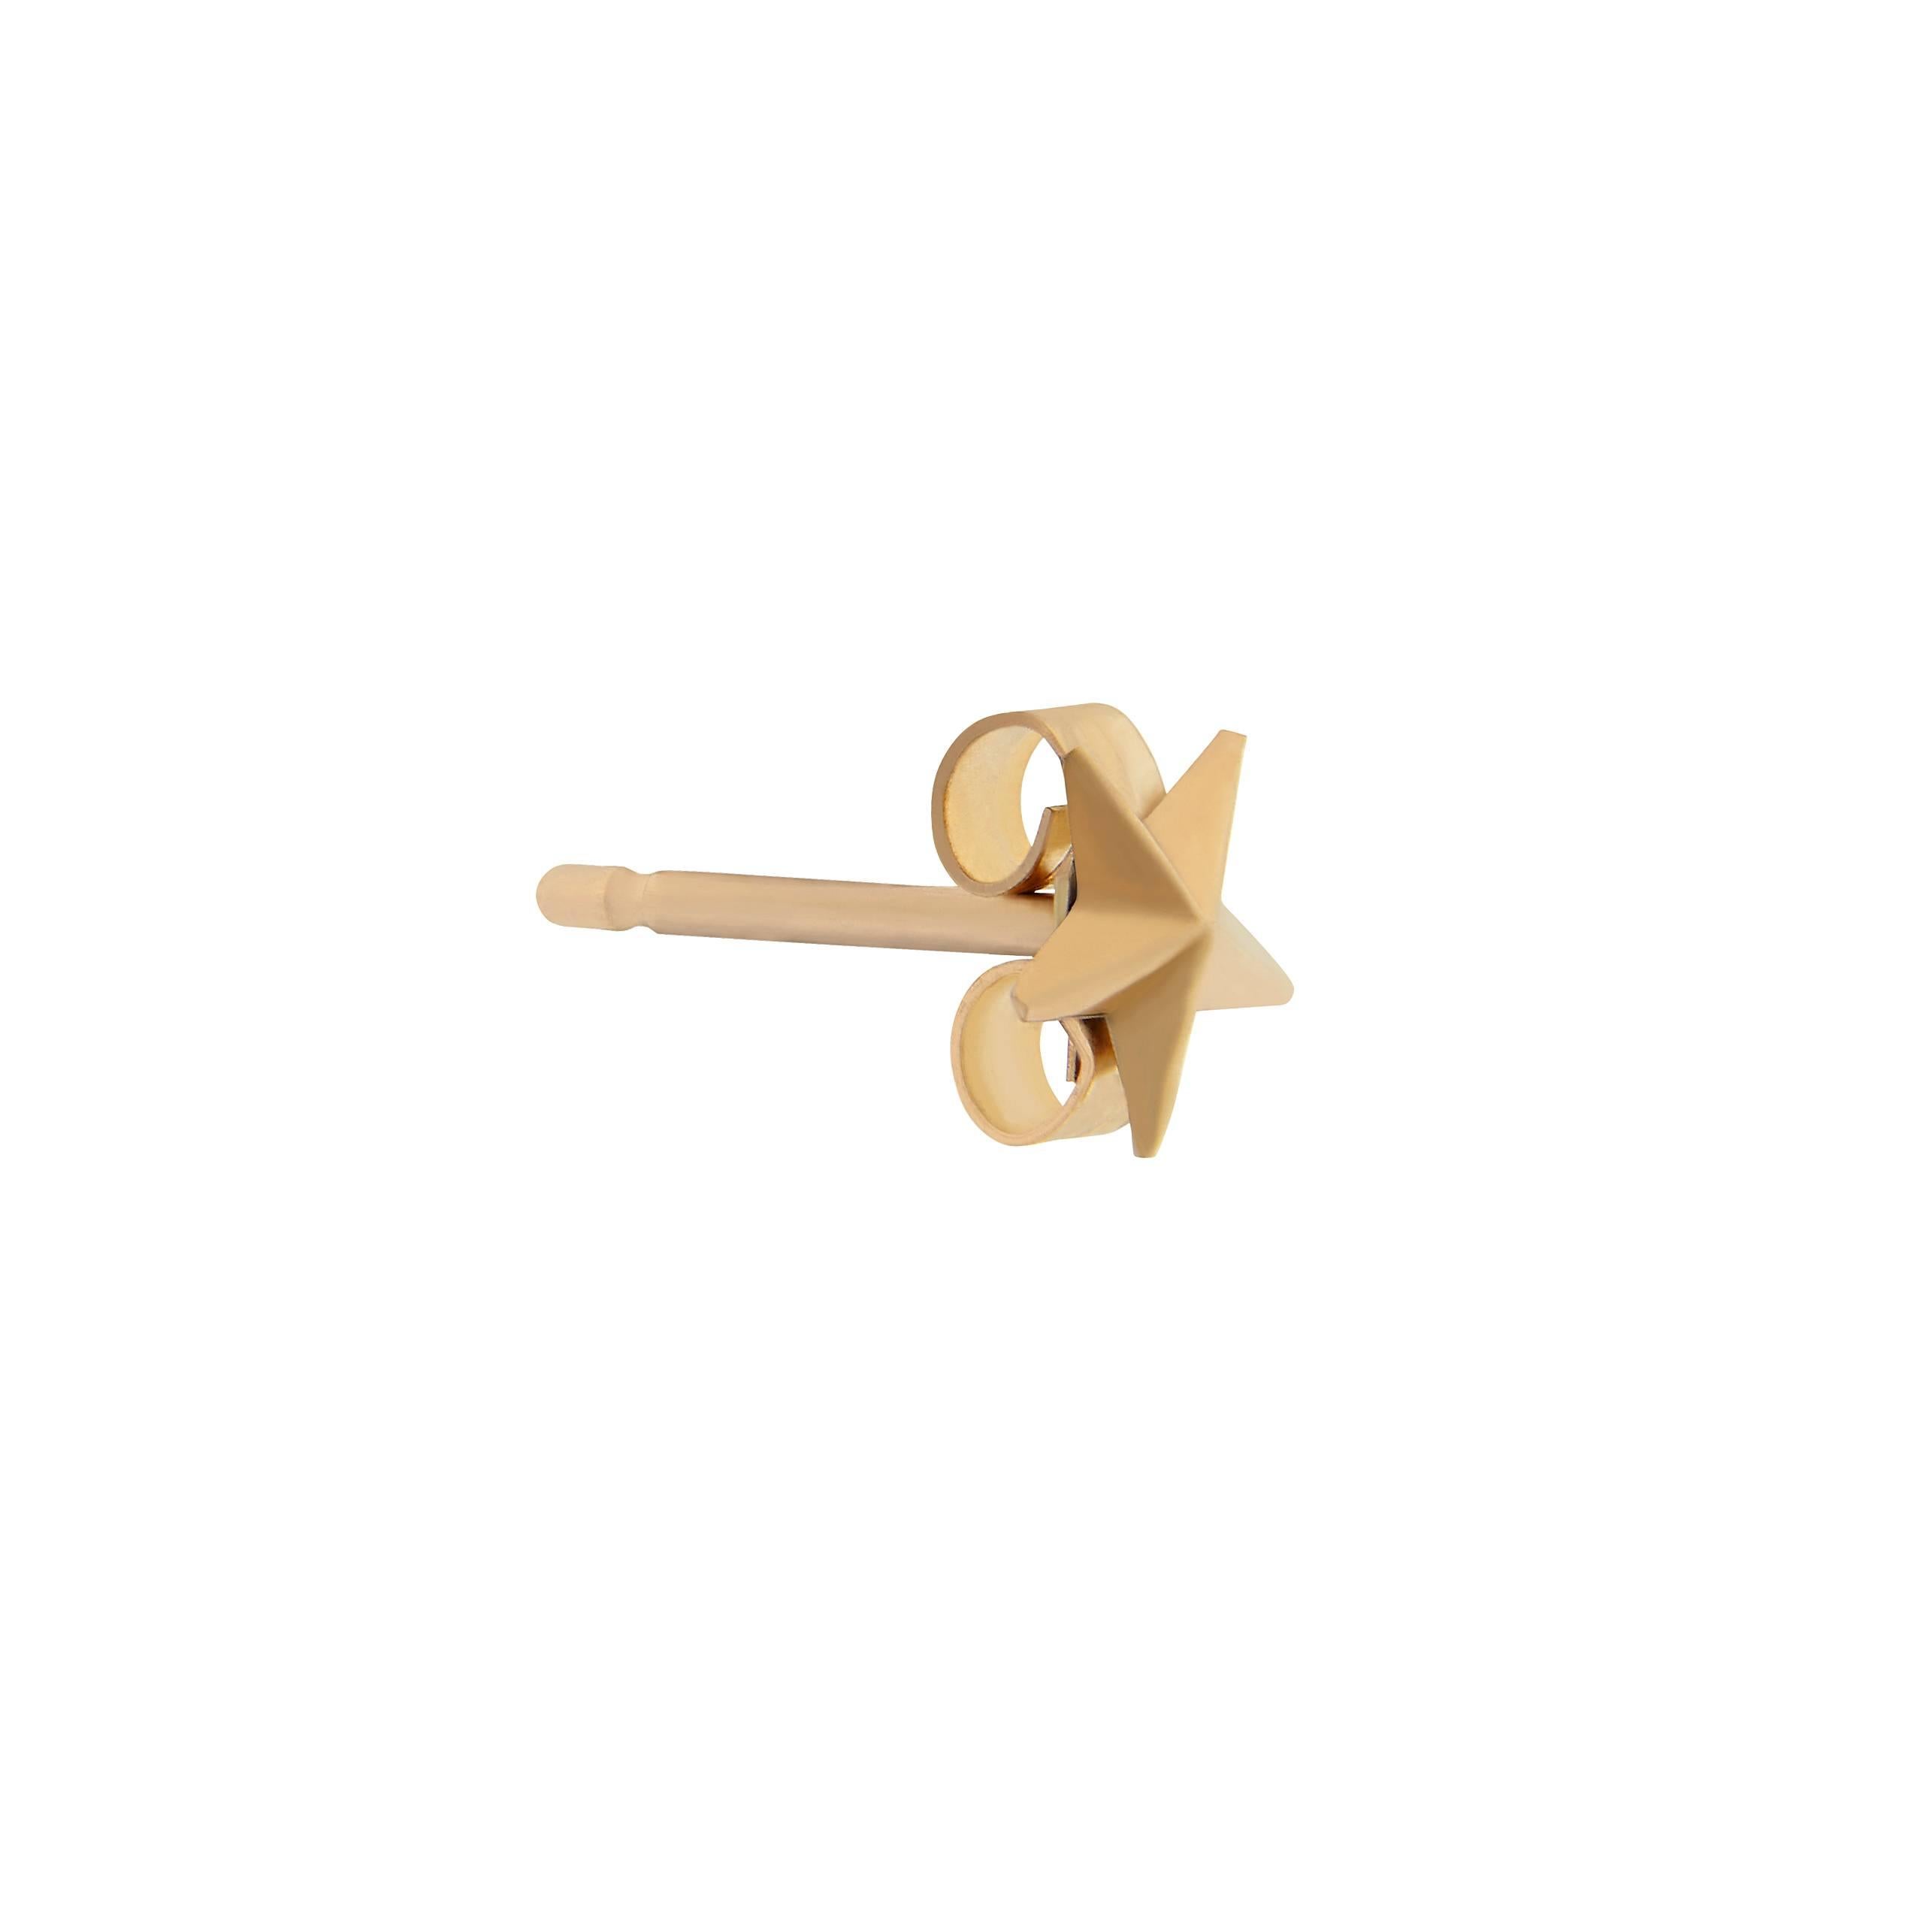 *MADE TO ORDER - 3 WEEK LEAD TIME*

9ct gold Star studs